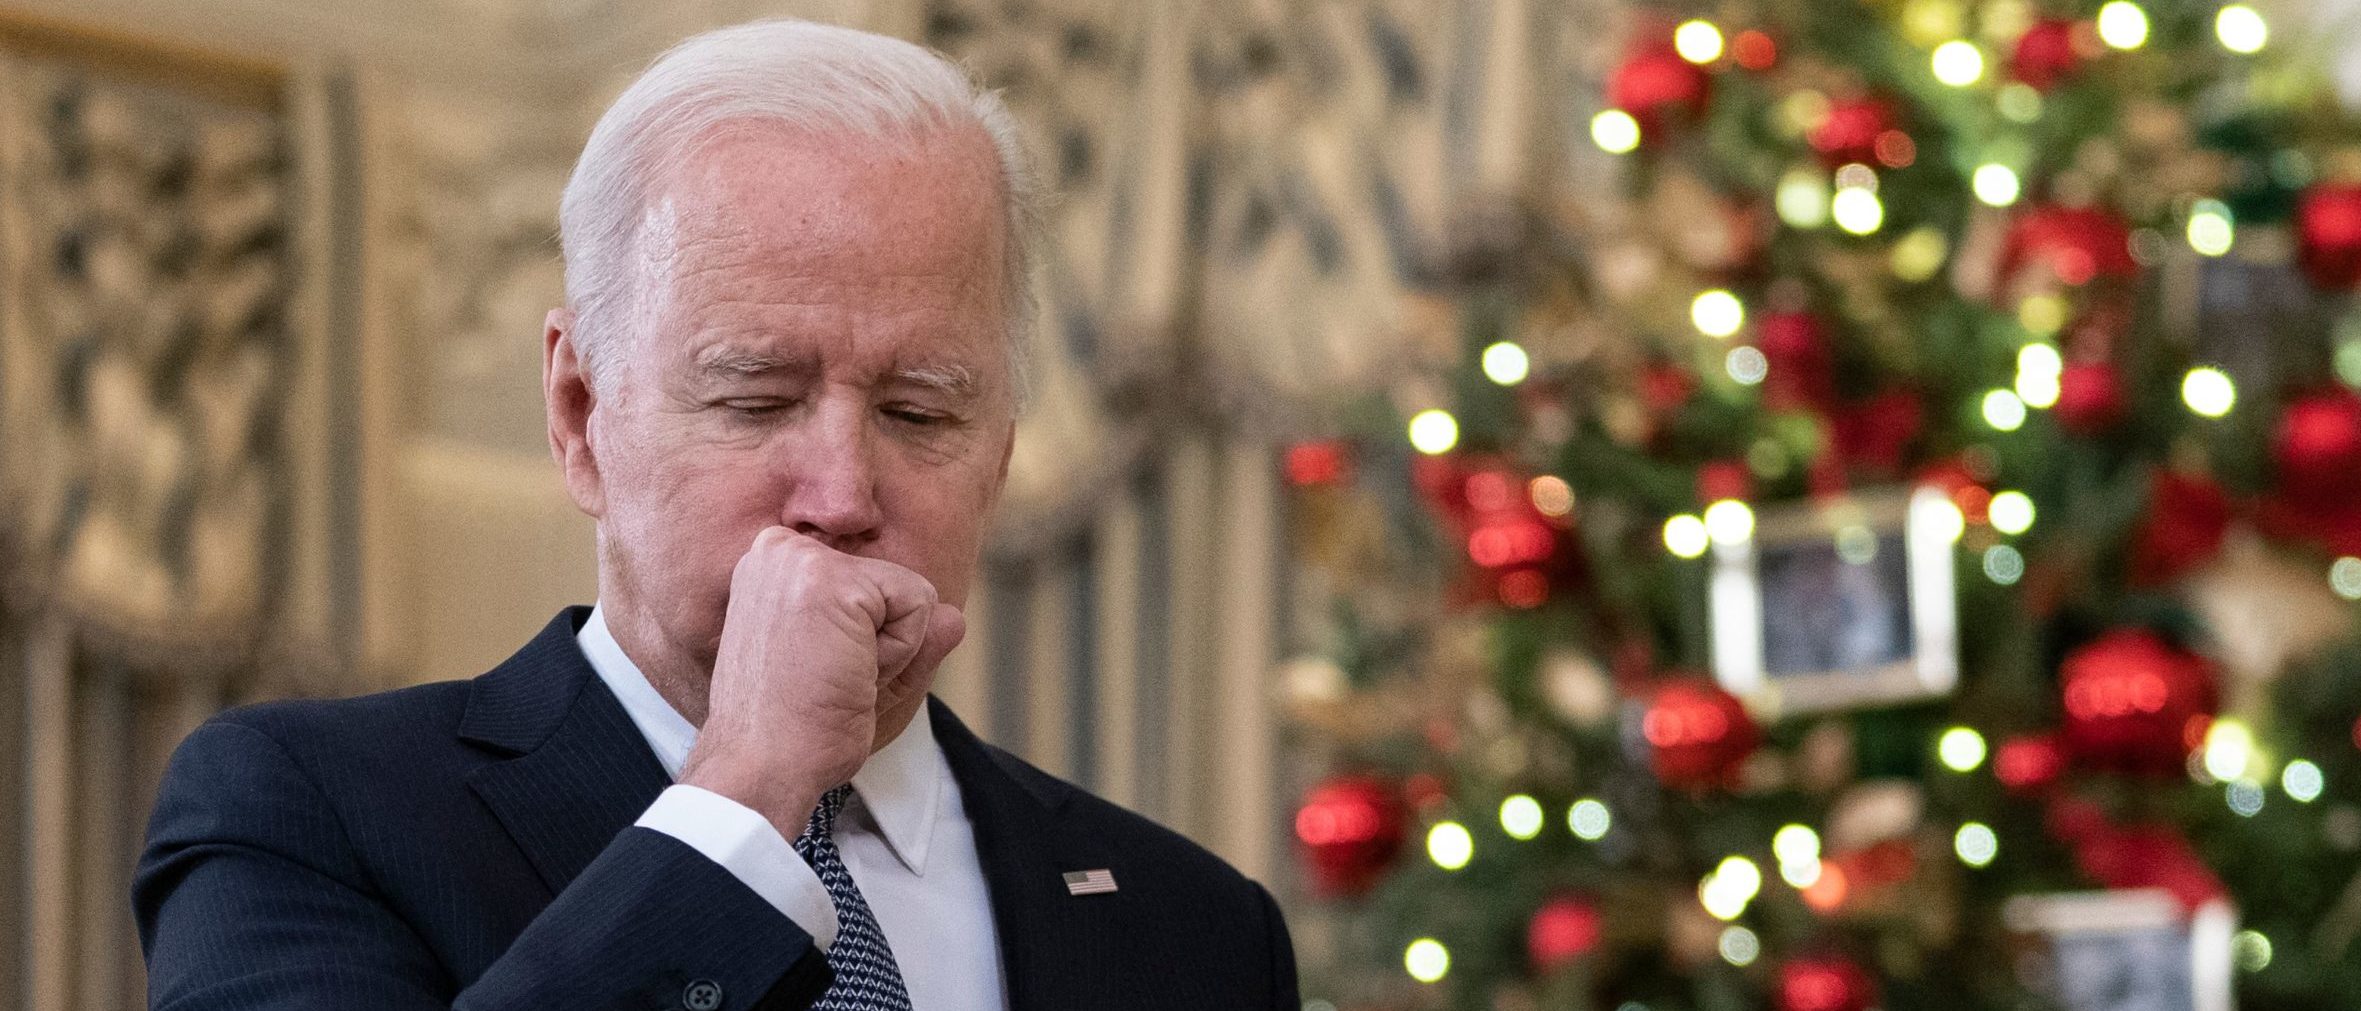 President Joe Biden coughs as he talks to reporters about the November Jobs Report on Friday. (Andrew Caballero-Reynolds/AFP via Getty Images)